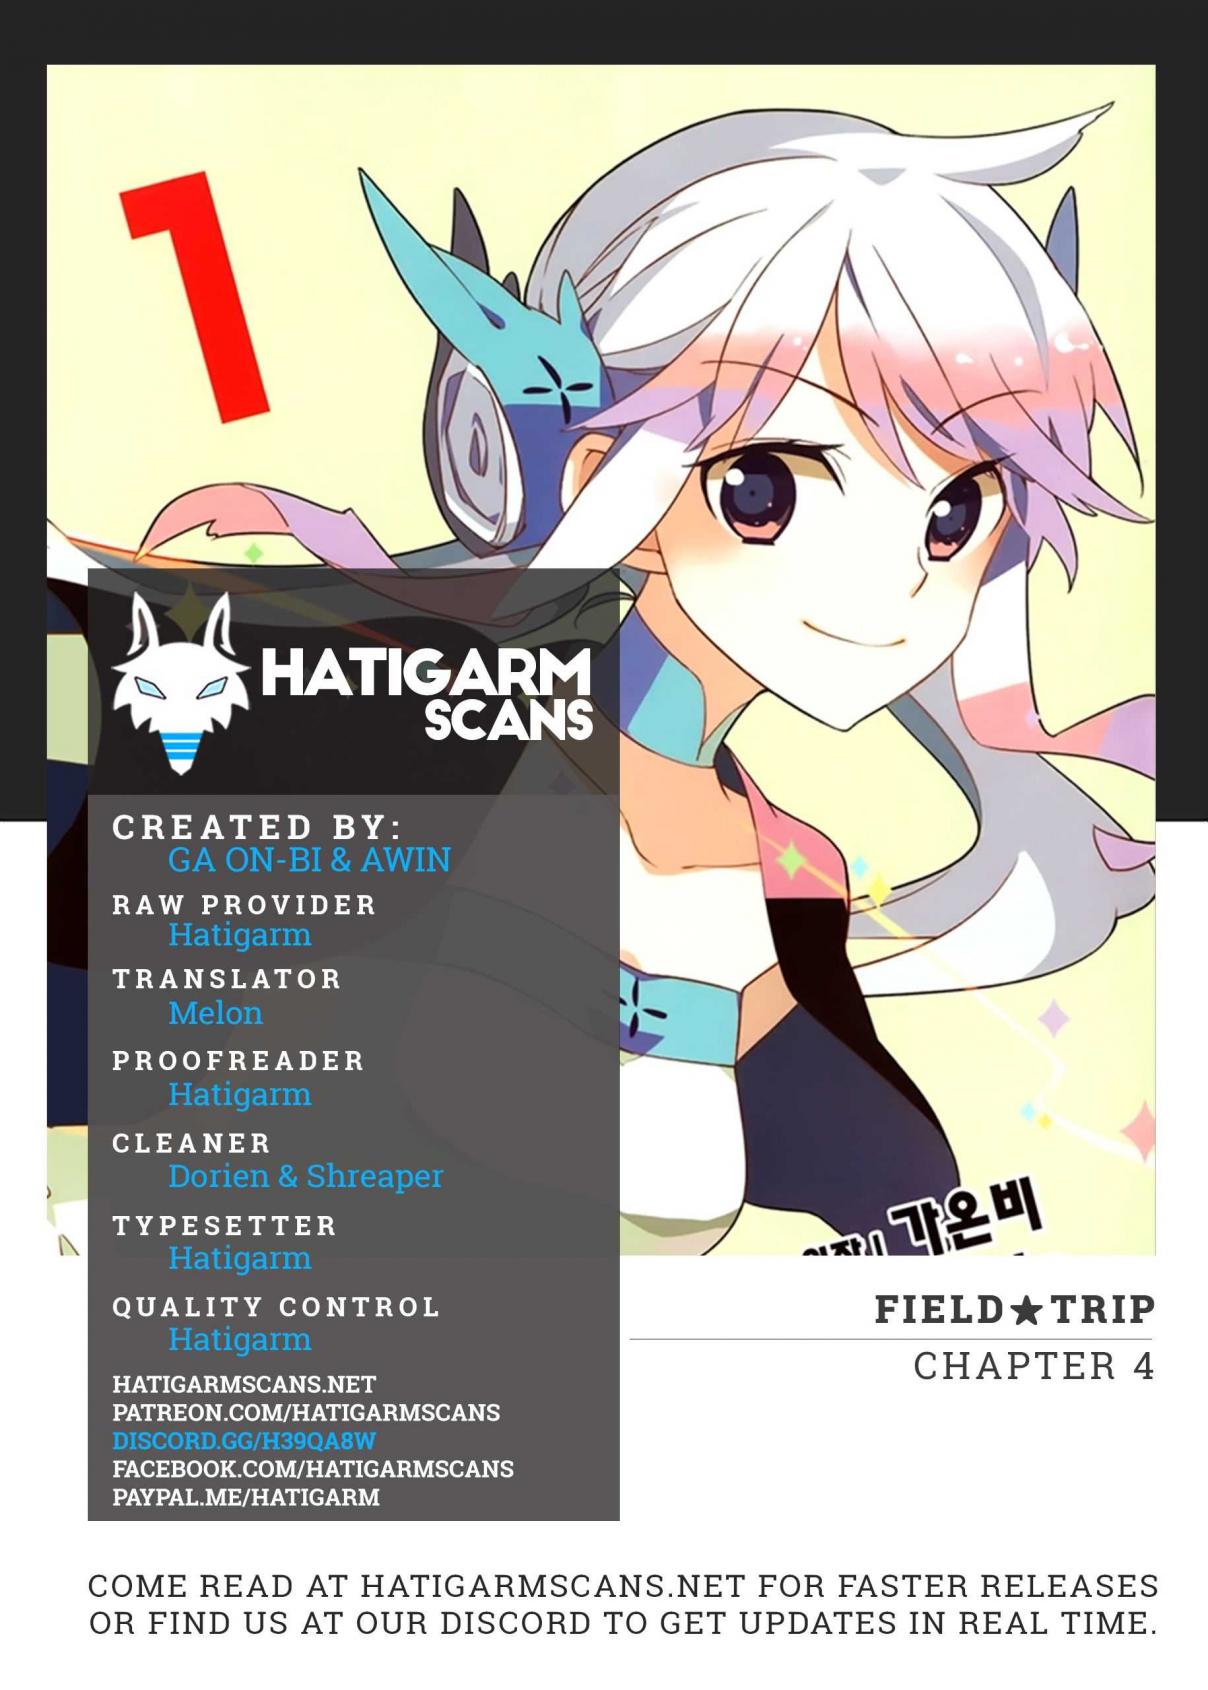 Field★Trip Vol. 1 Ch. 4 Girls, Be Ambitious